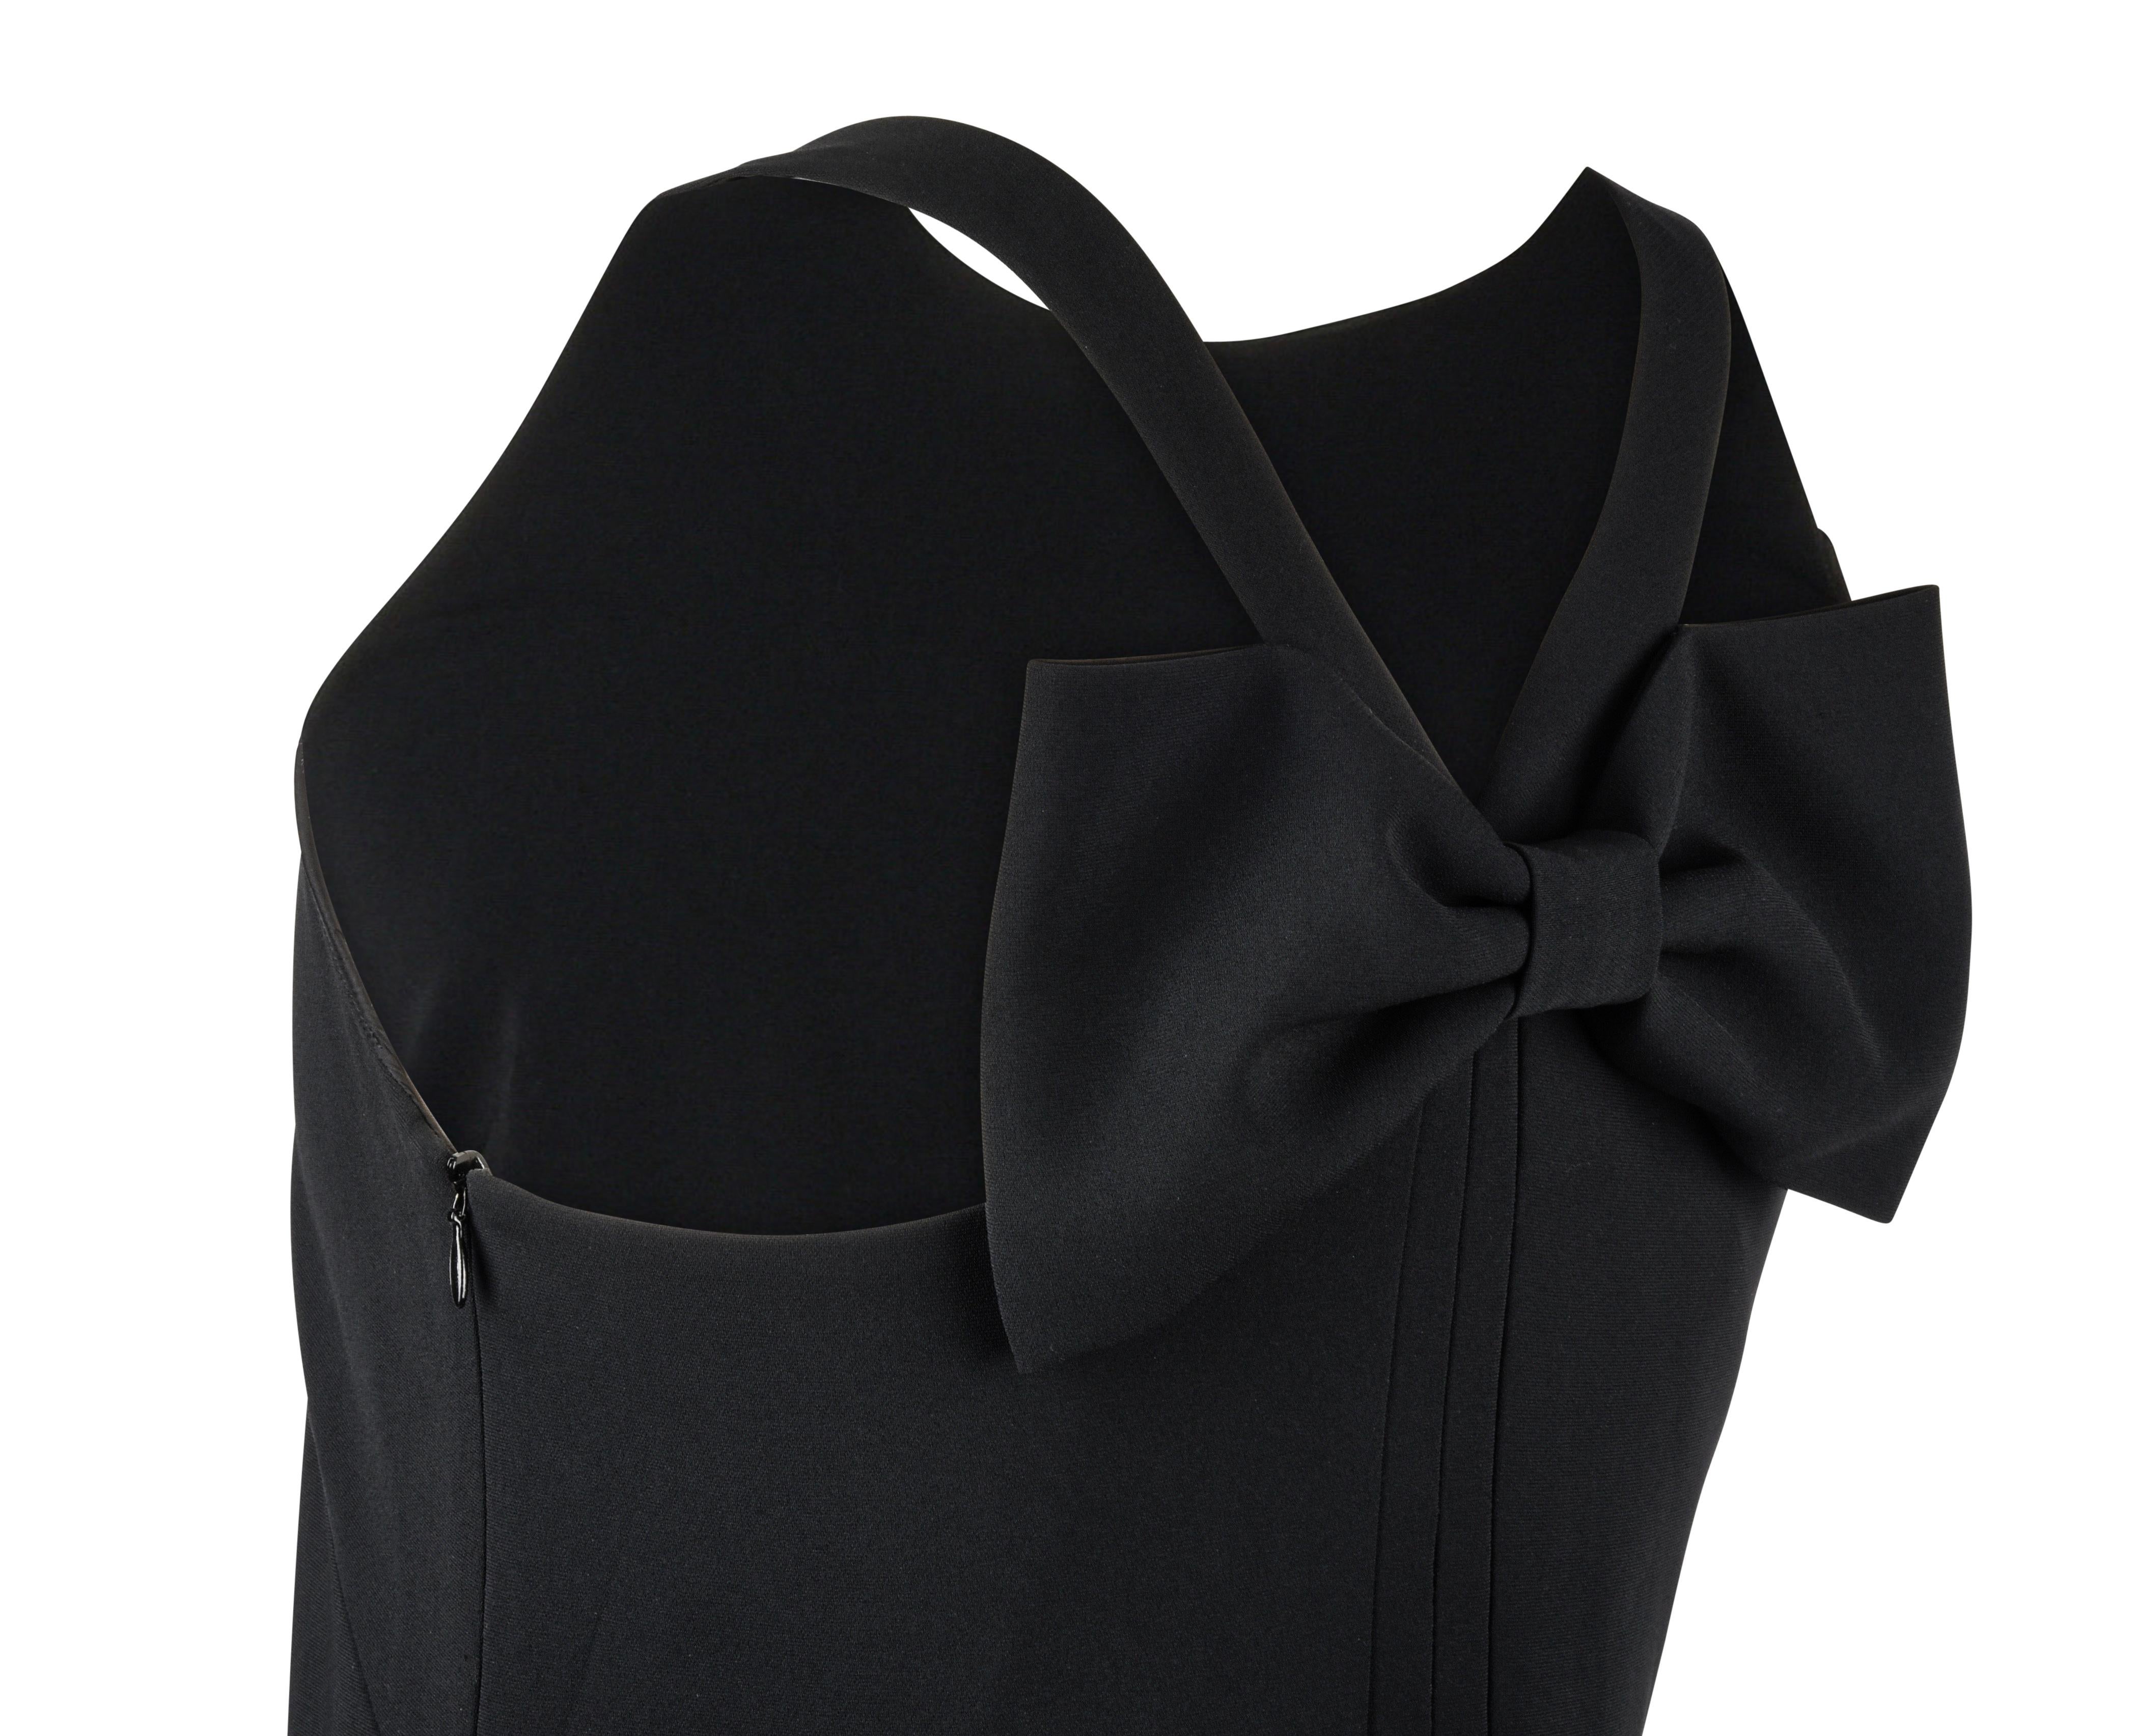 Moschino Dress Black Racer Cut Shoulder Rear Bow and Pleat Detail 42 / 8  3